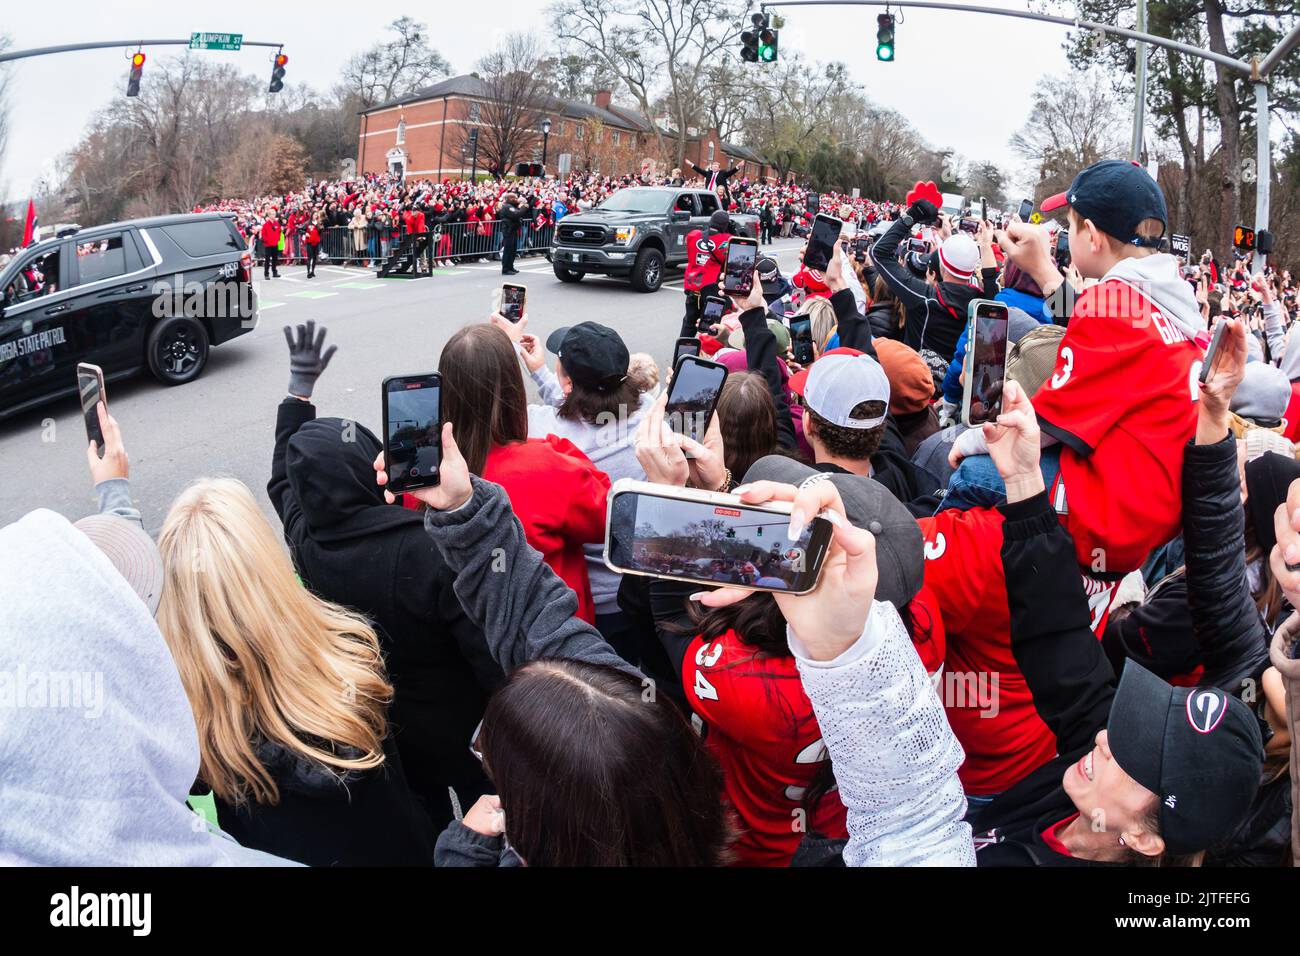 ATHENS, GA - JANUARY 15, 2022: Thousands of UGA football fans cheer on coach Kirby Smart as they celebrate at Georgia's National Championship parade. Stock Photo